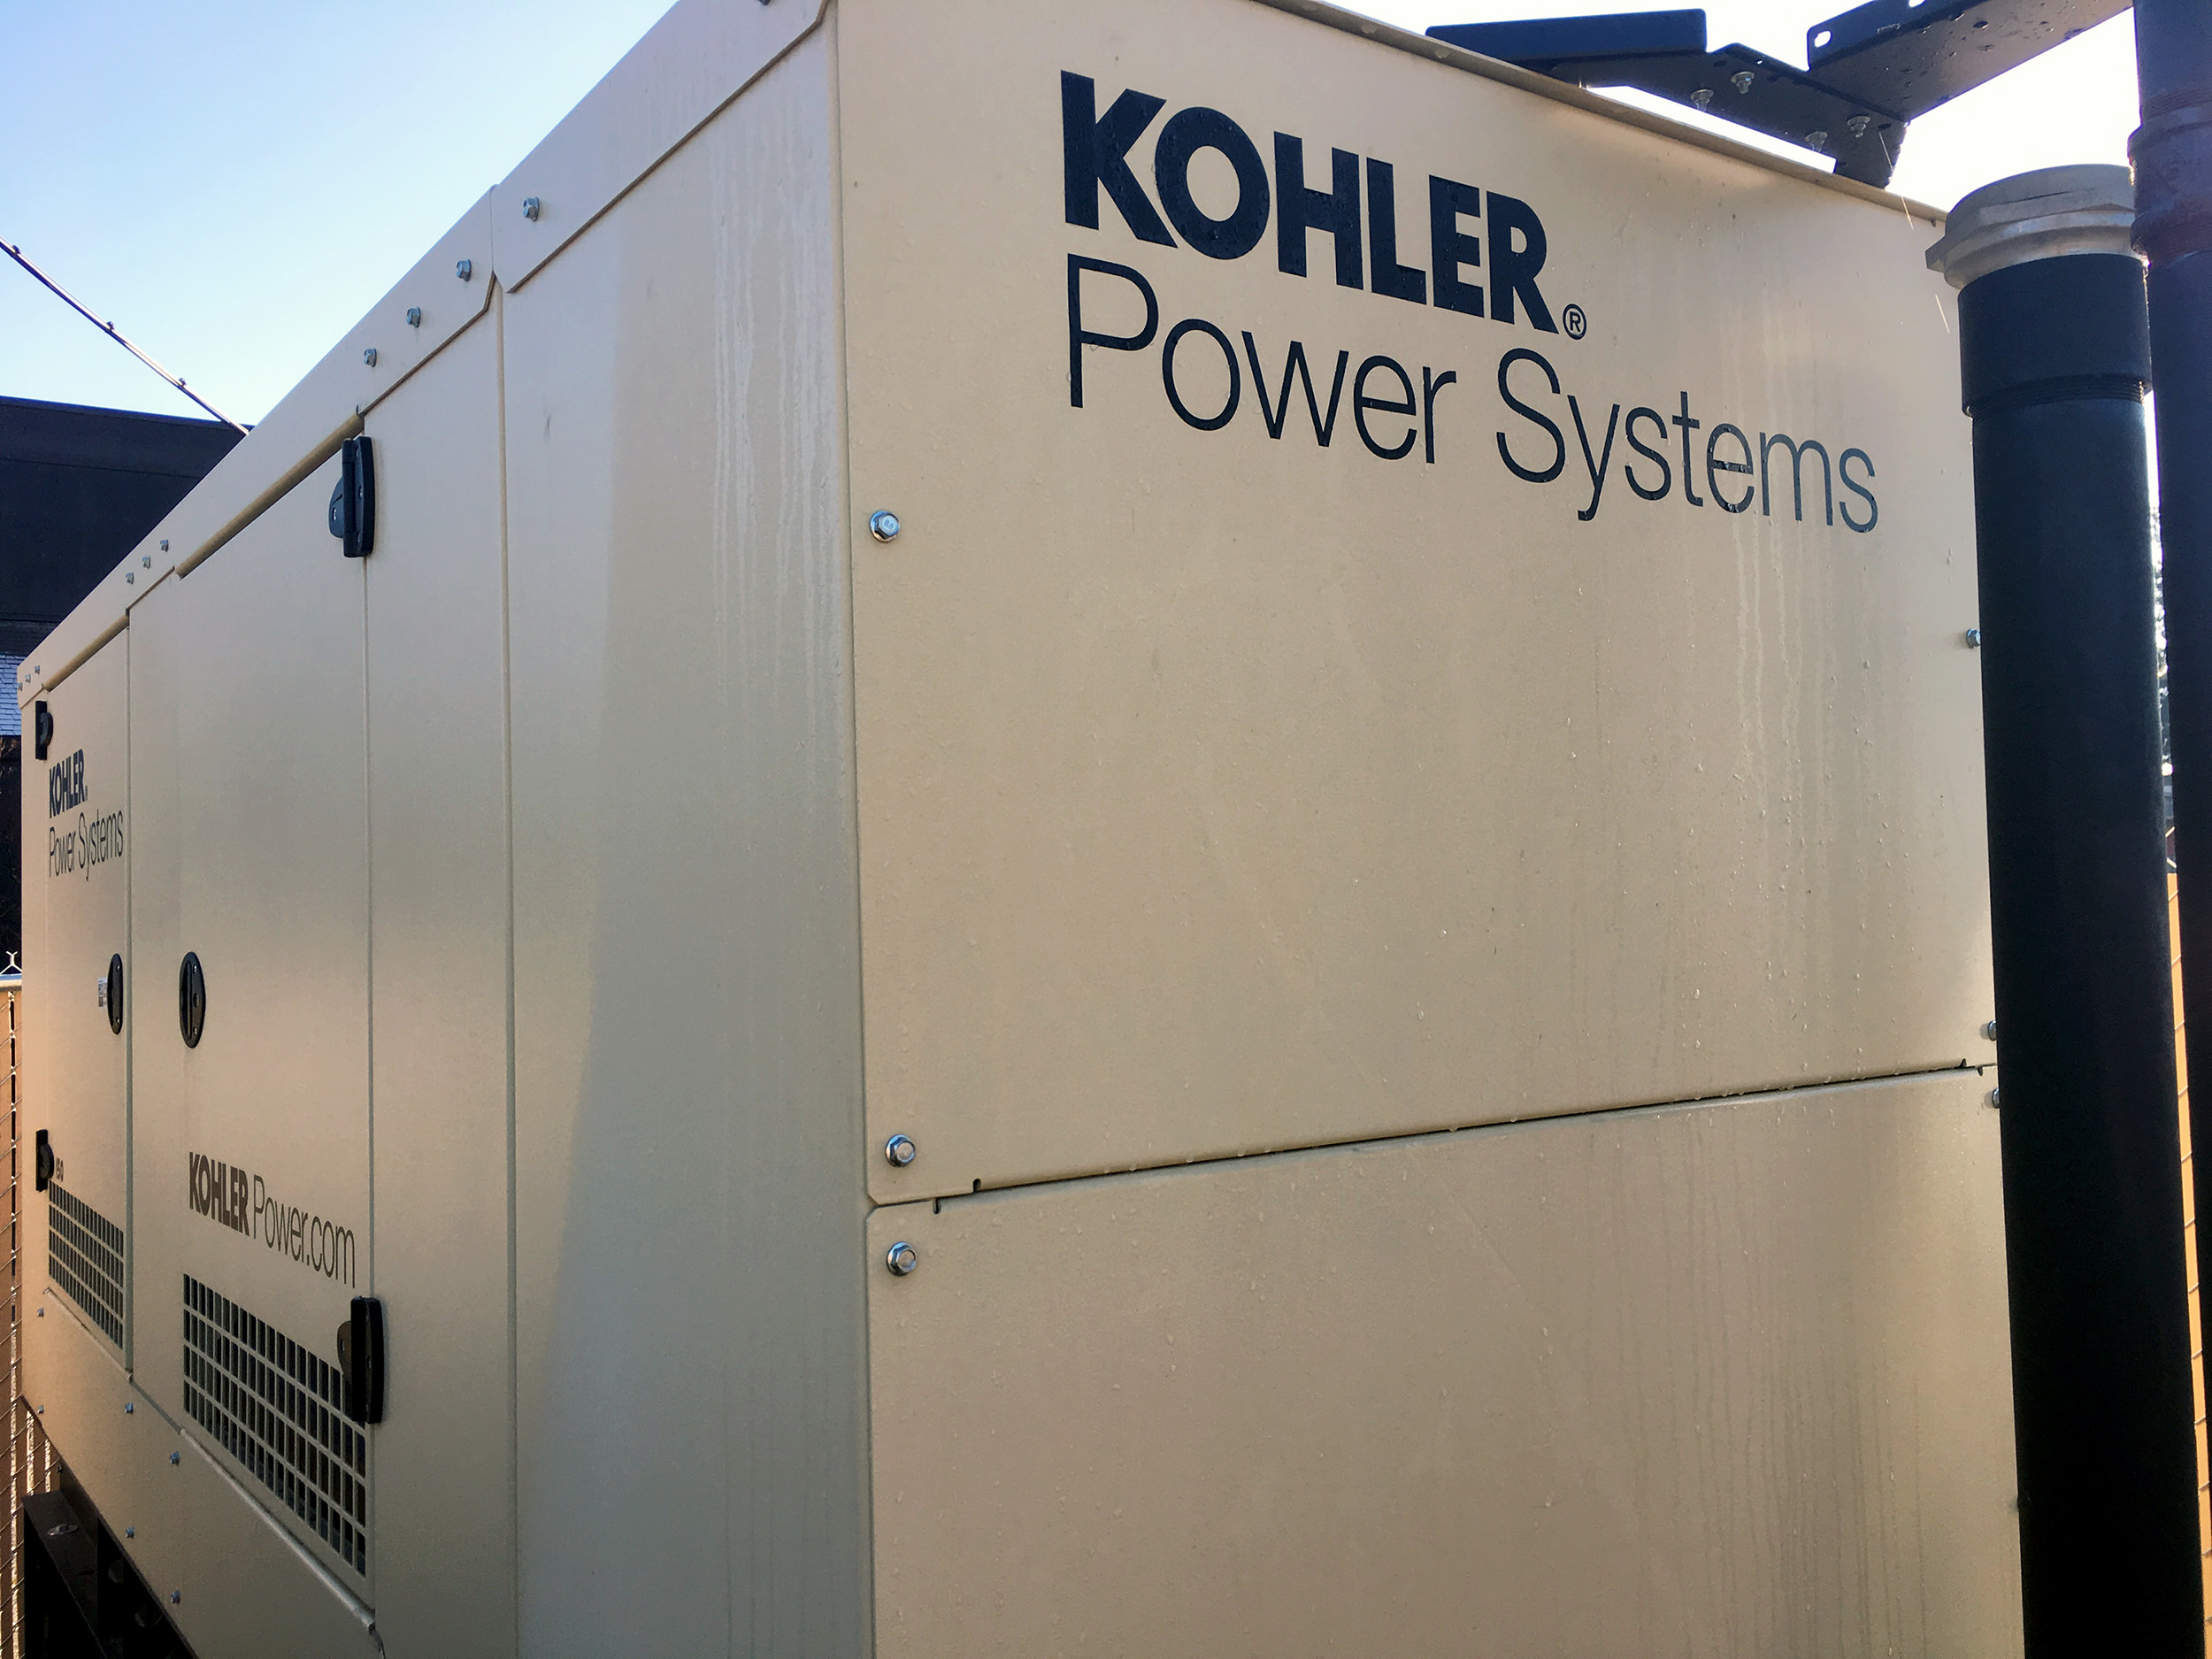  A new generator was installed in preparation of power outages  